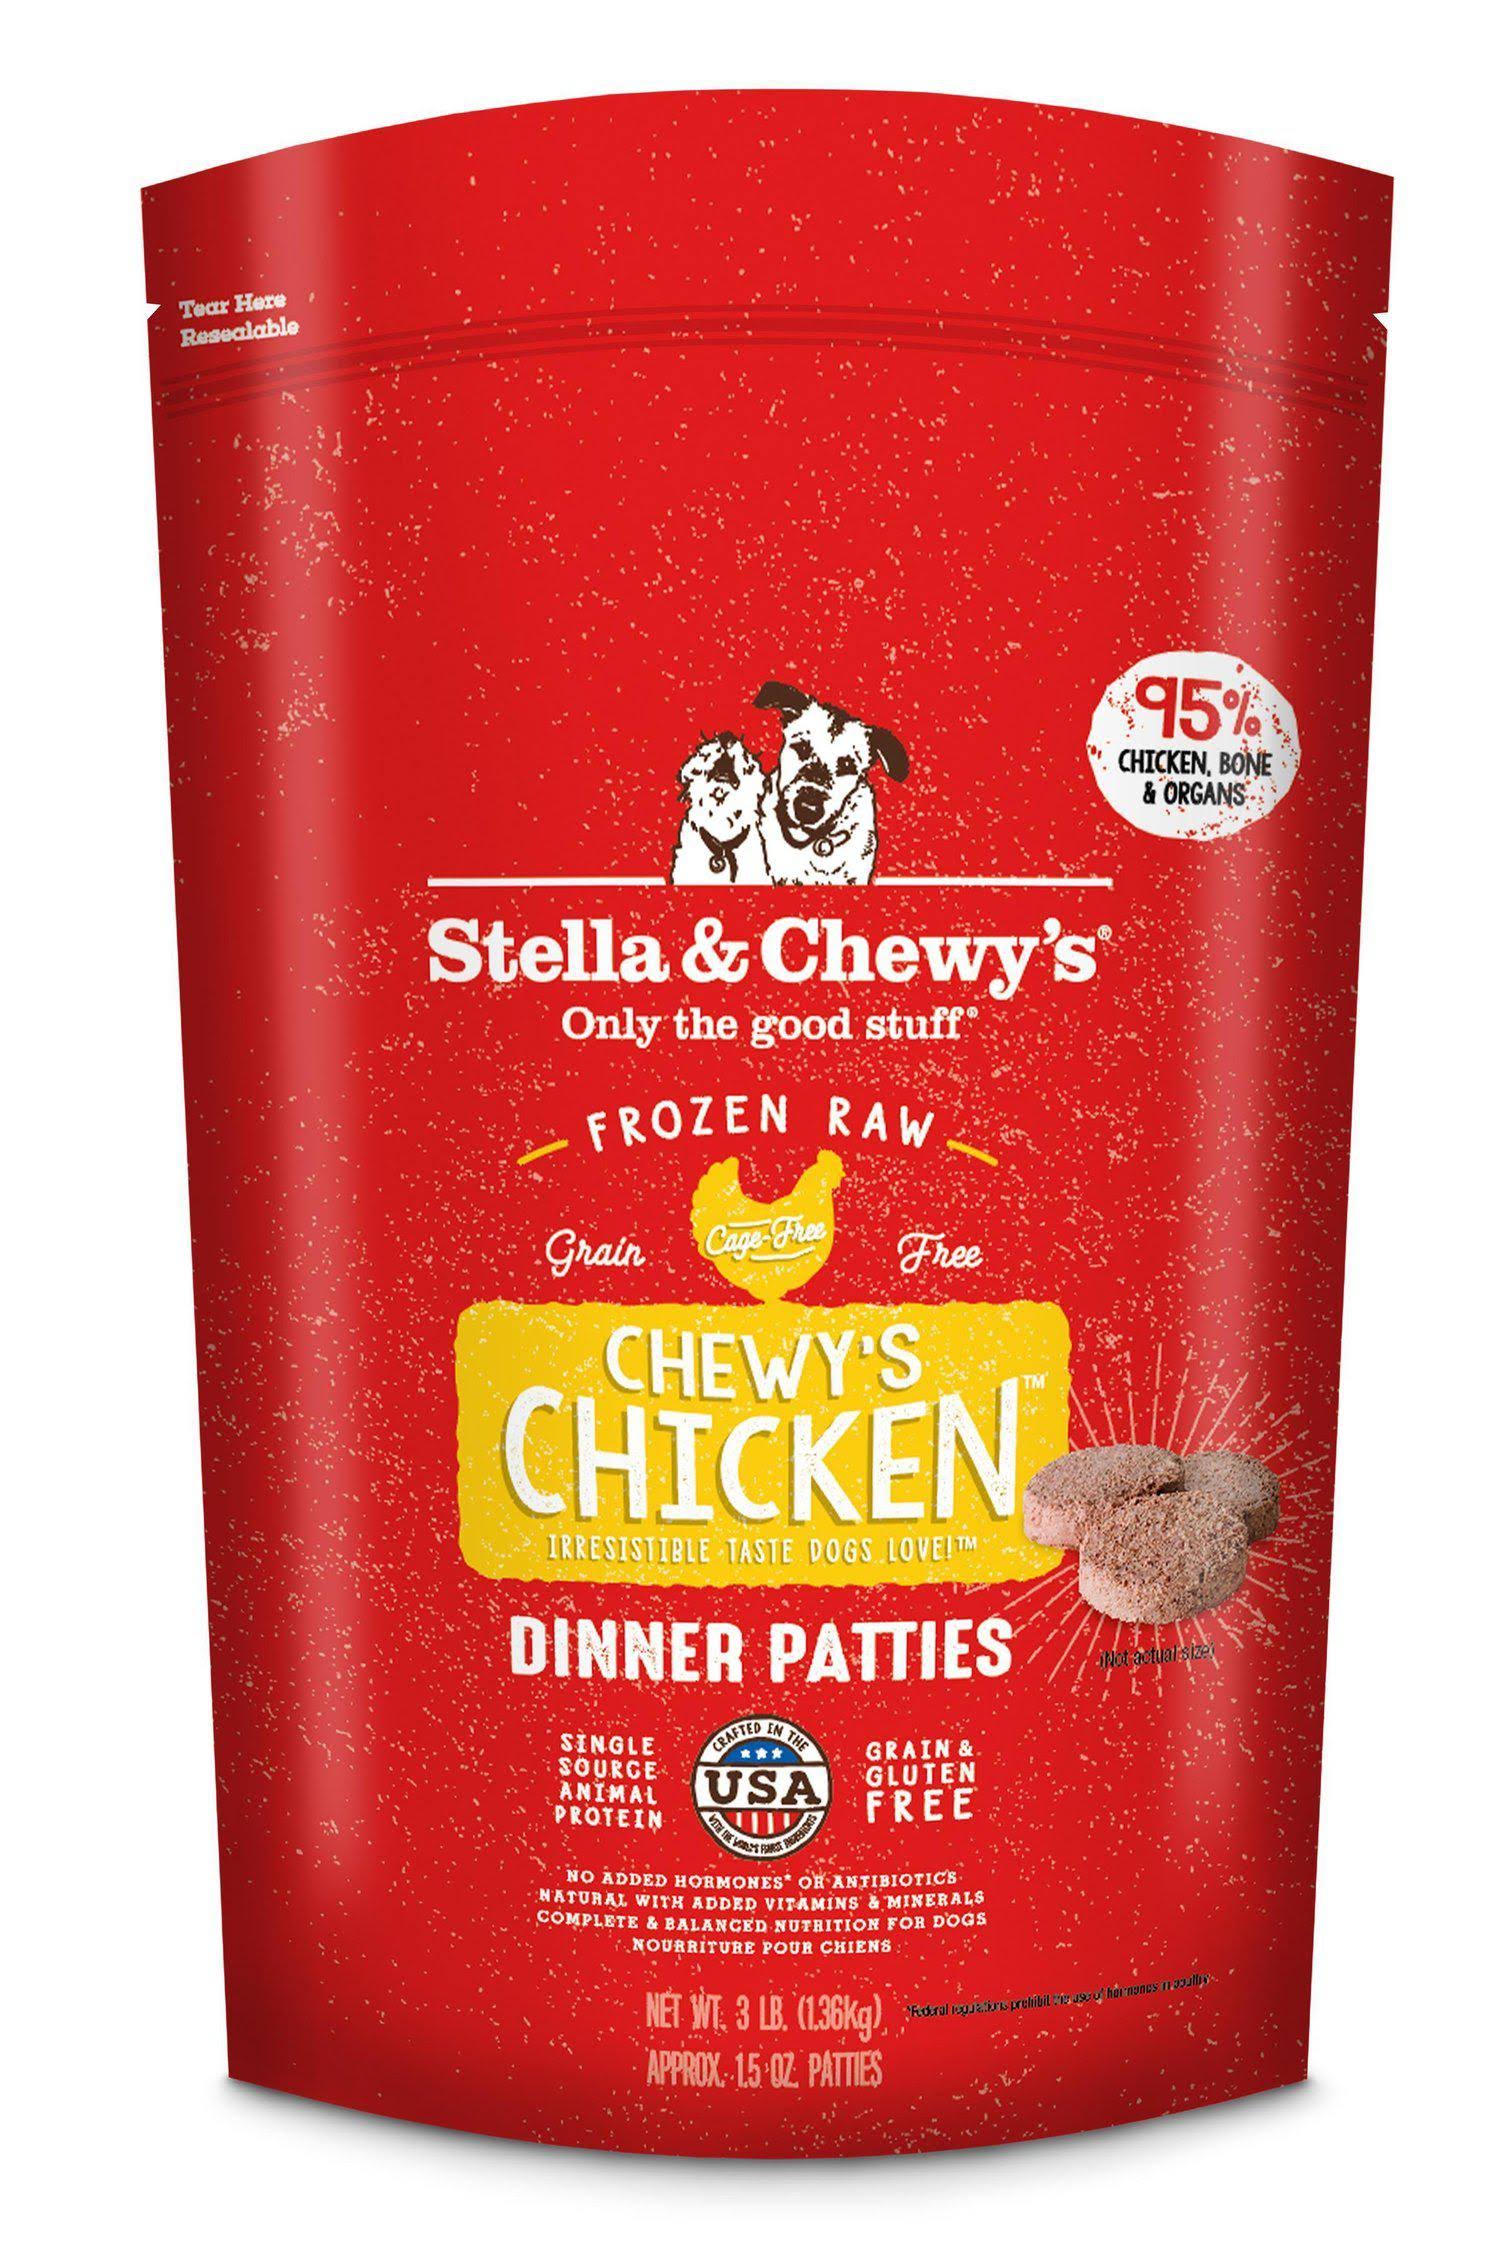 Stella & Chewy's Dog Food - Chewy's Chicken Dinner